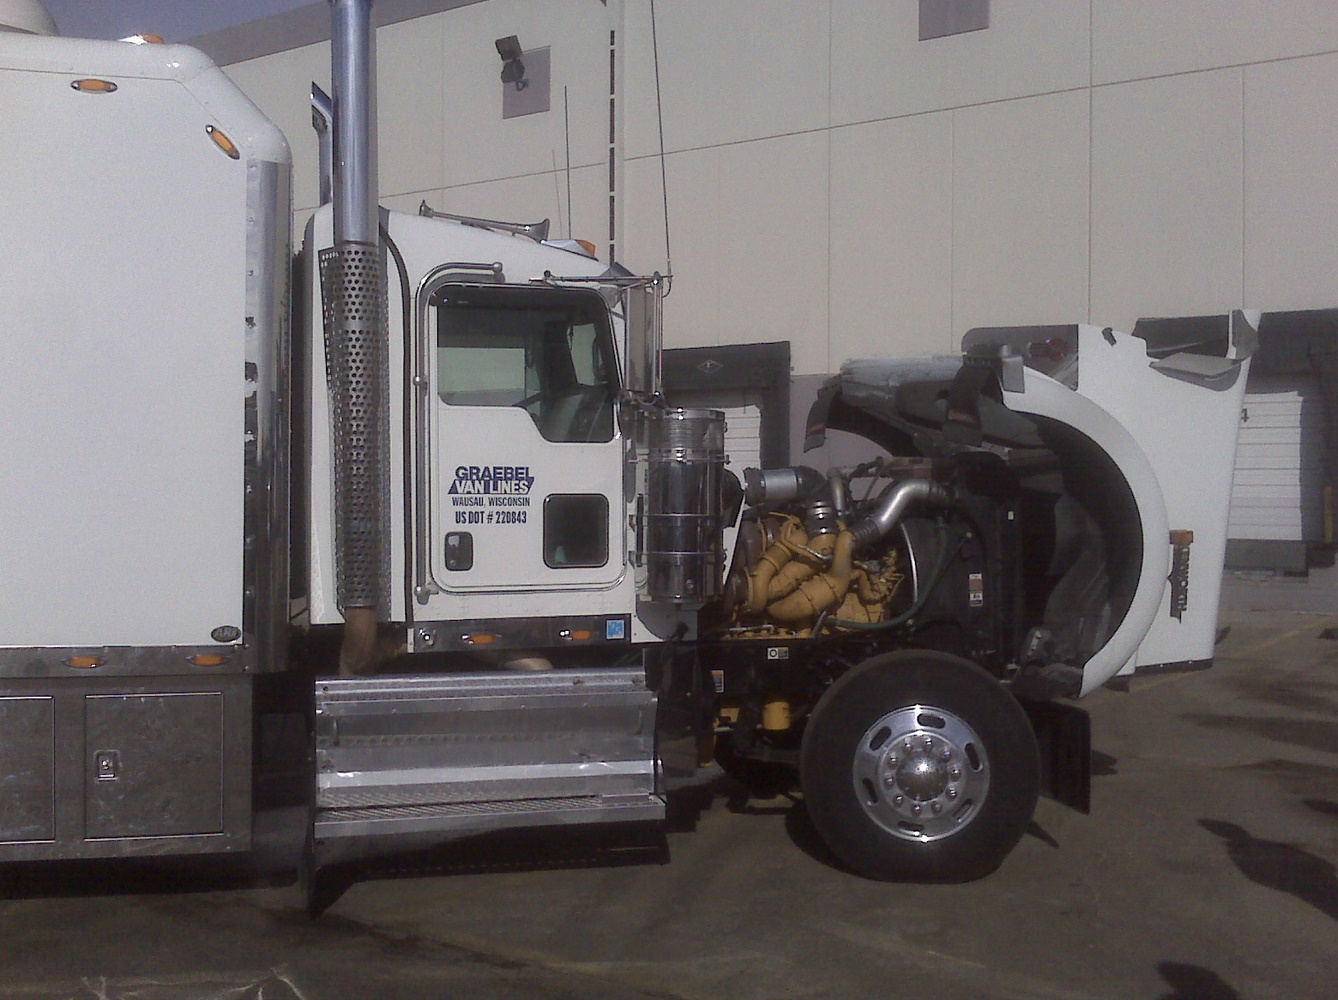 an image of Indio mobile truck engine repair.